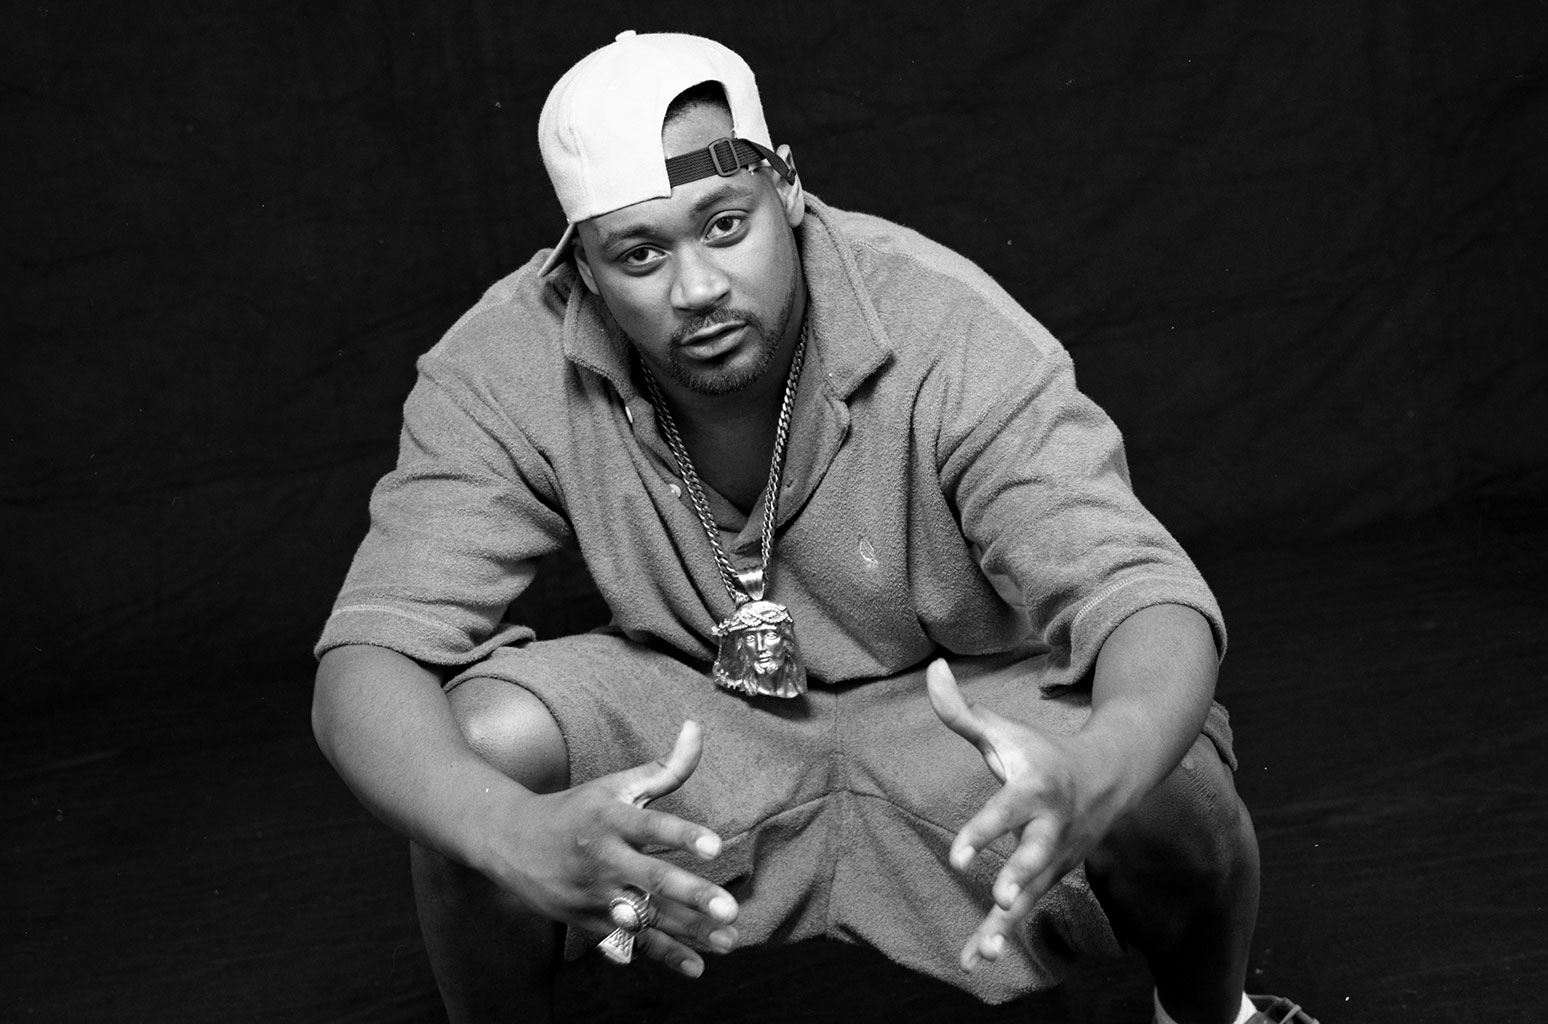 Ghostface Killah always has a story to tell